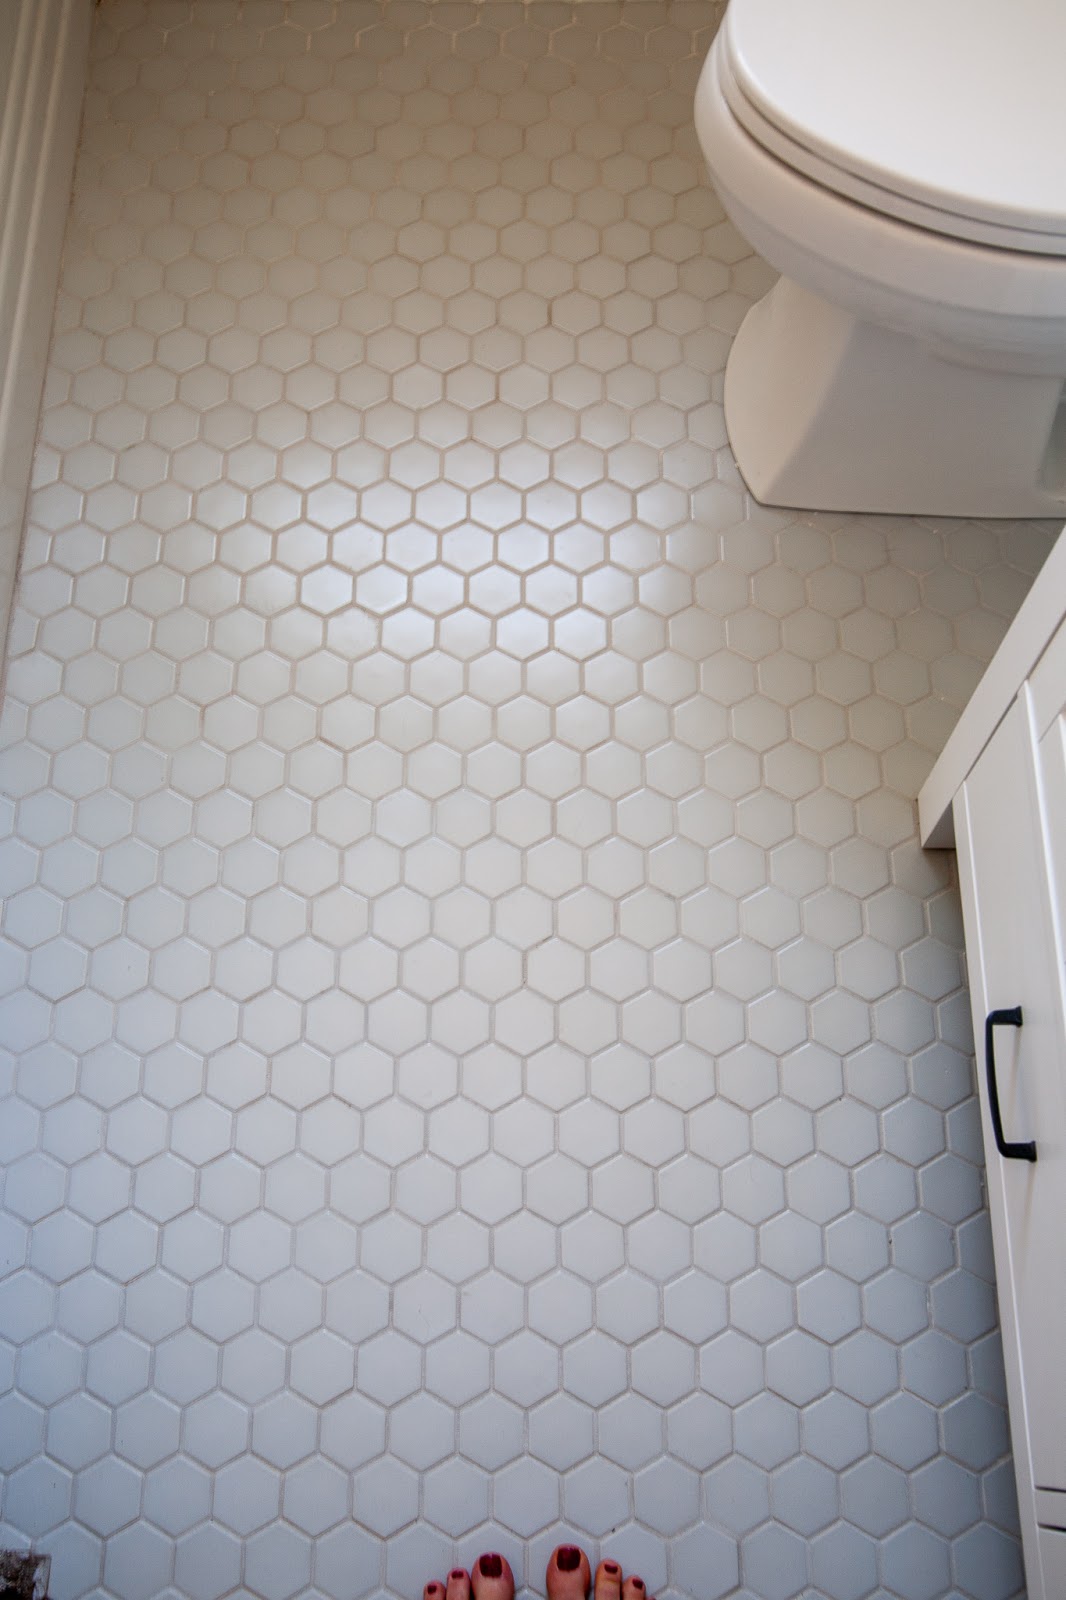 How To Lay Mosaic Tile Flooring Week, How To Lay Mosaic Tile In Shower Floor